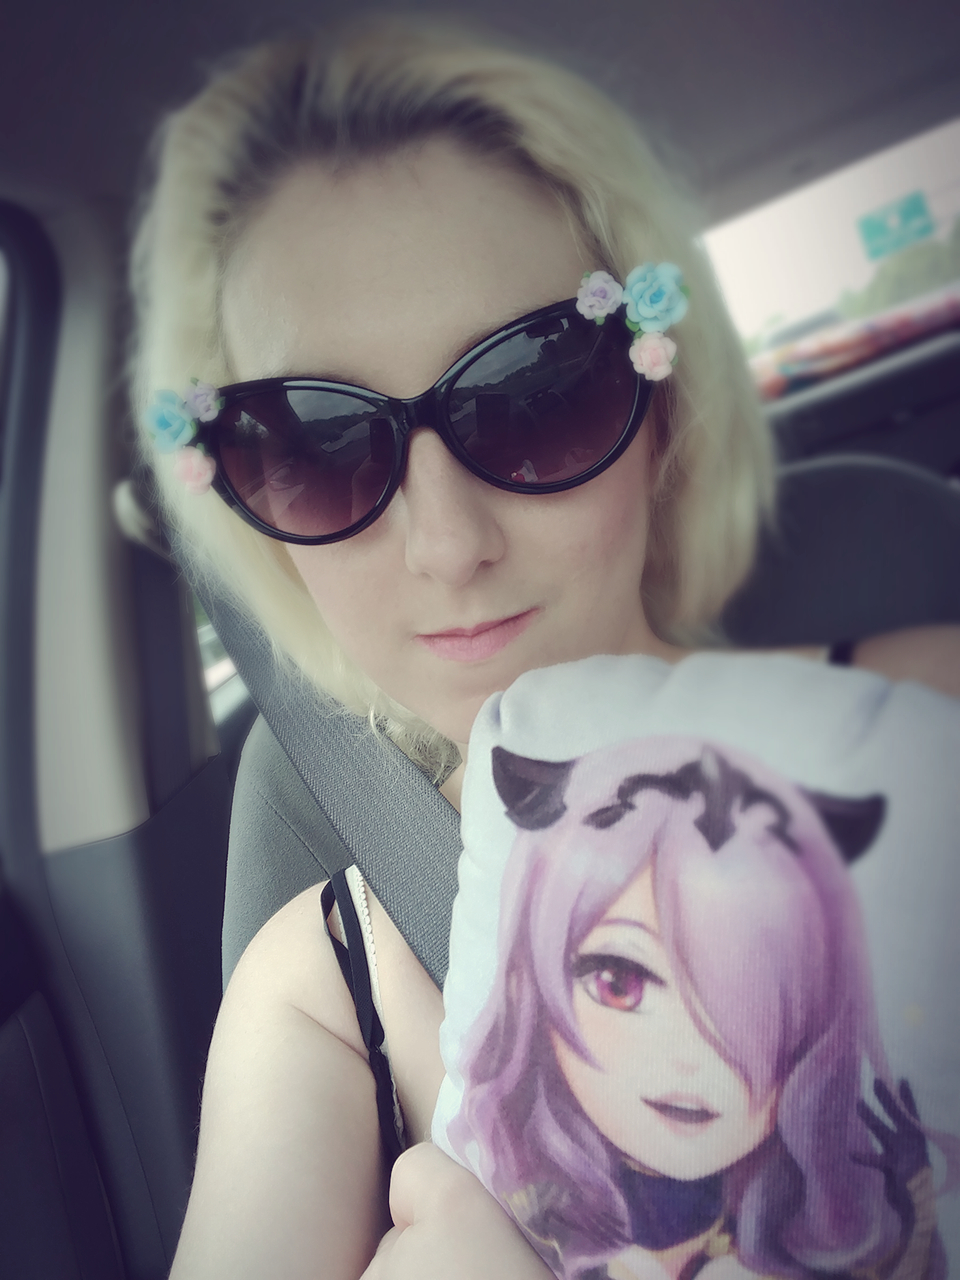 Me with Camilla pillow!